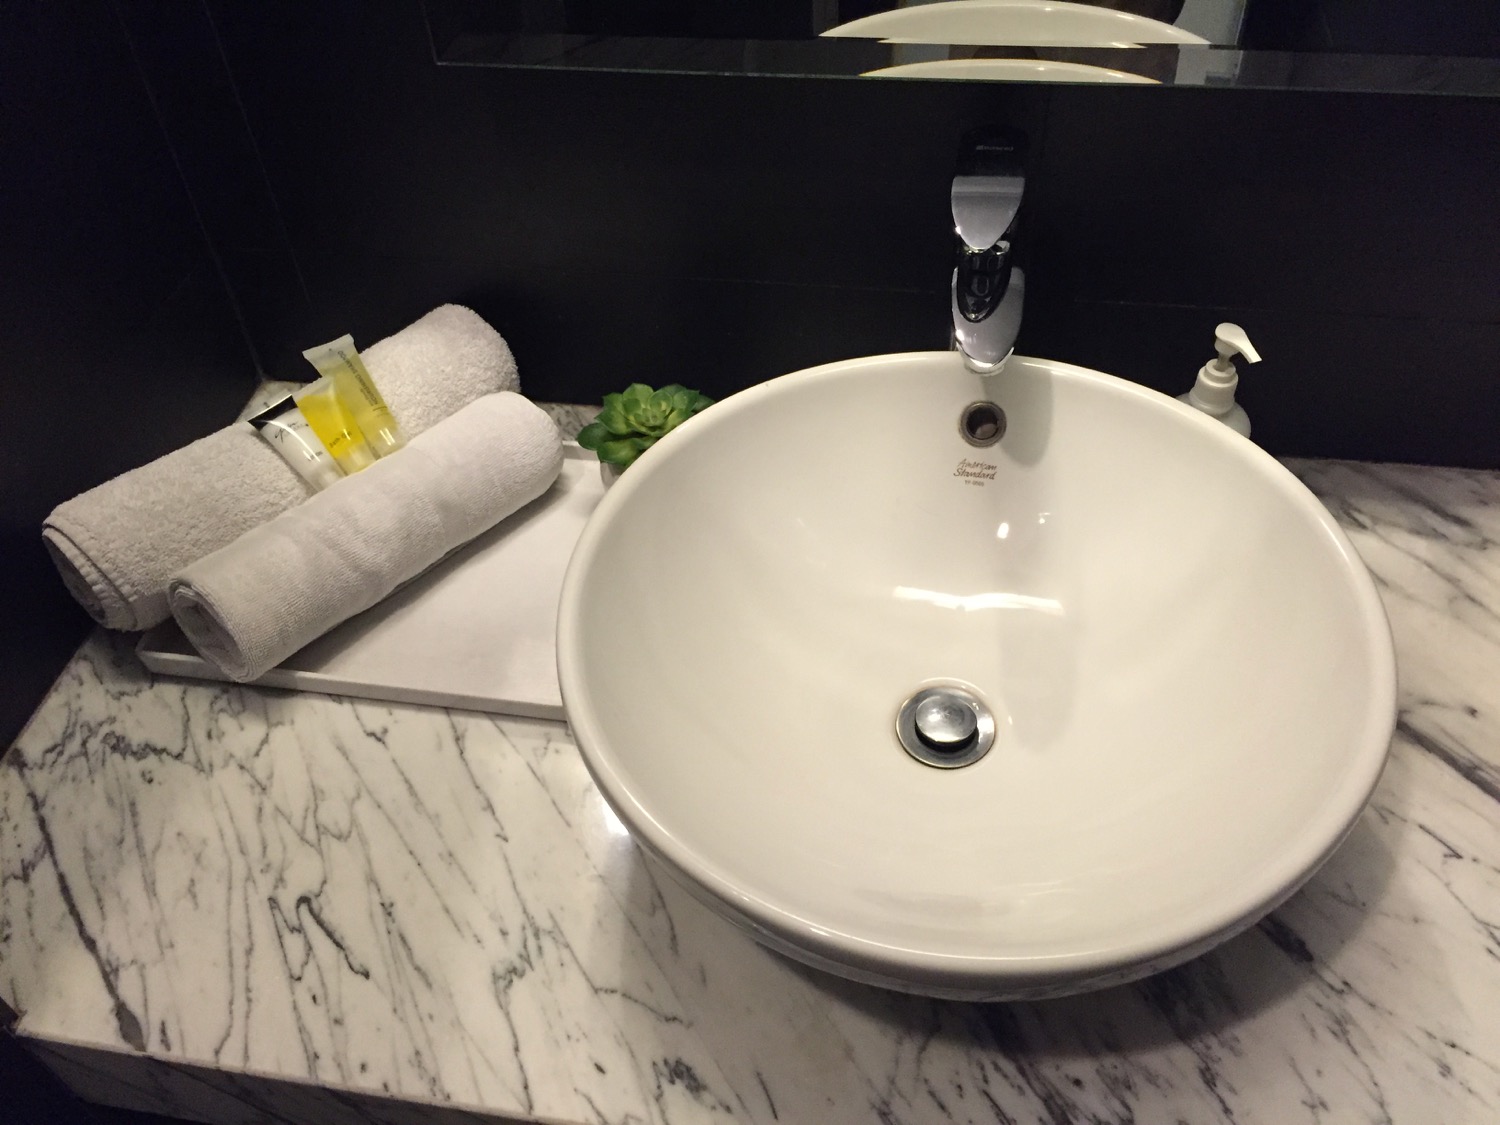 a sink and towel on a counter